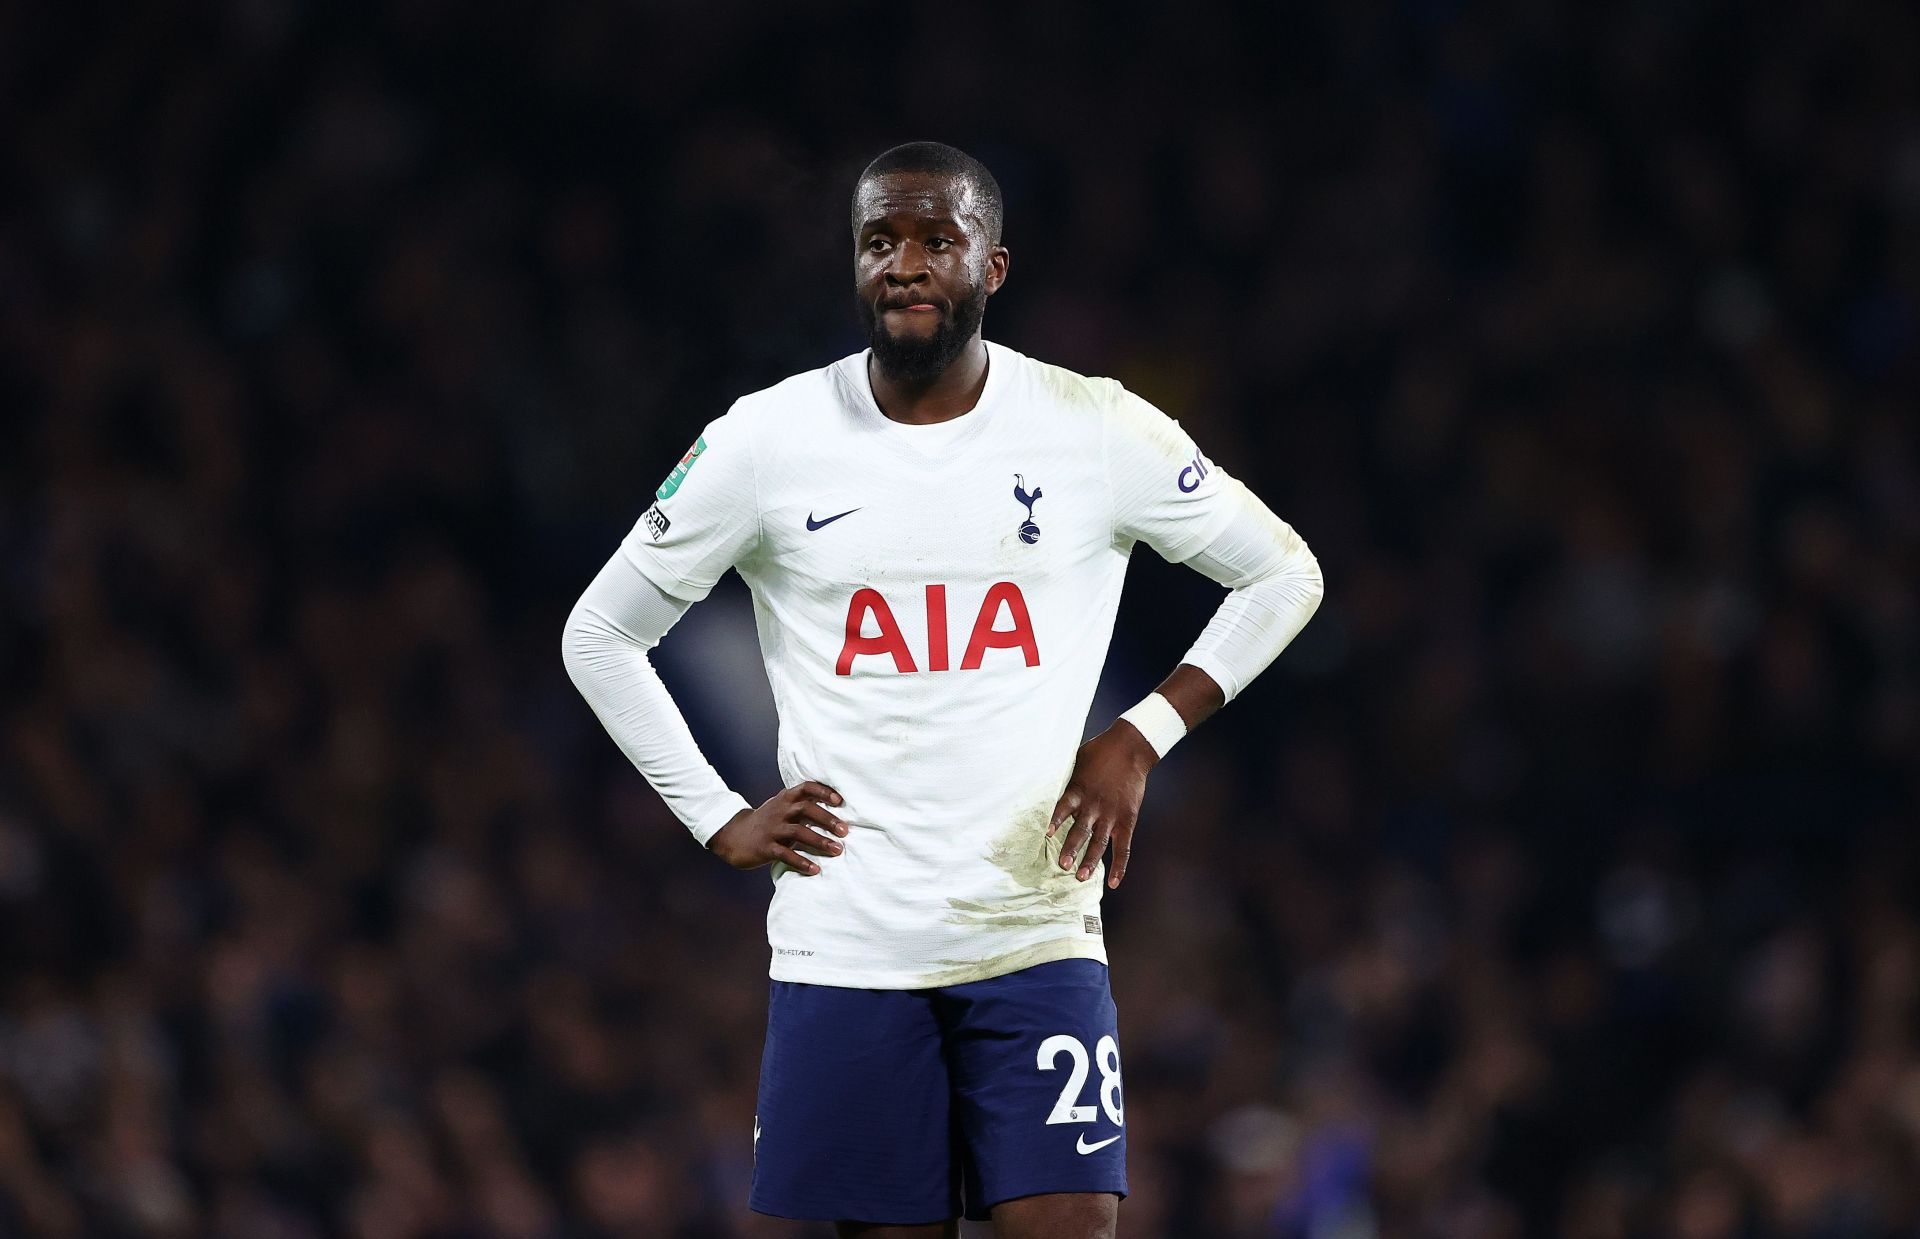 Ndombele has been linked with a move to PSG.